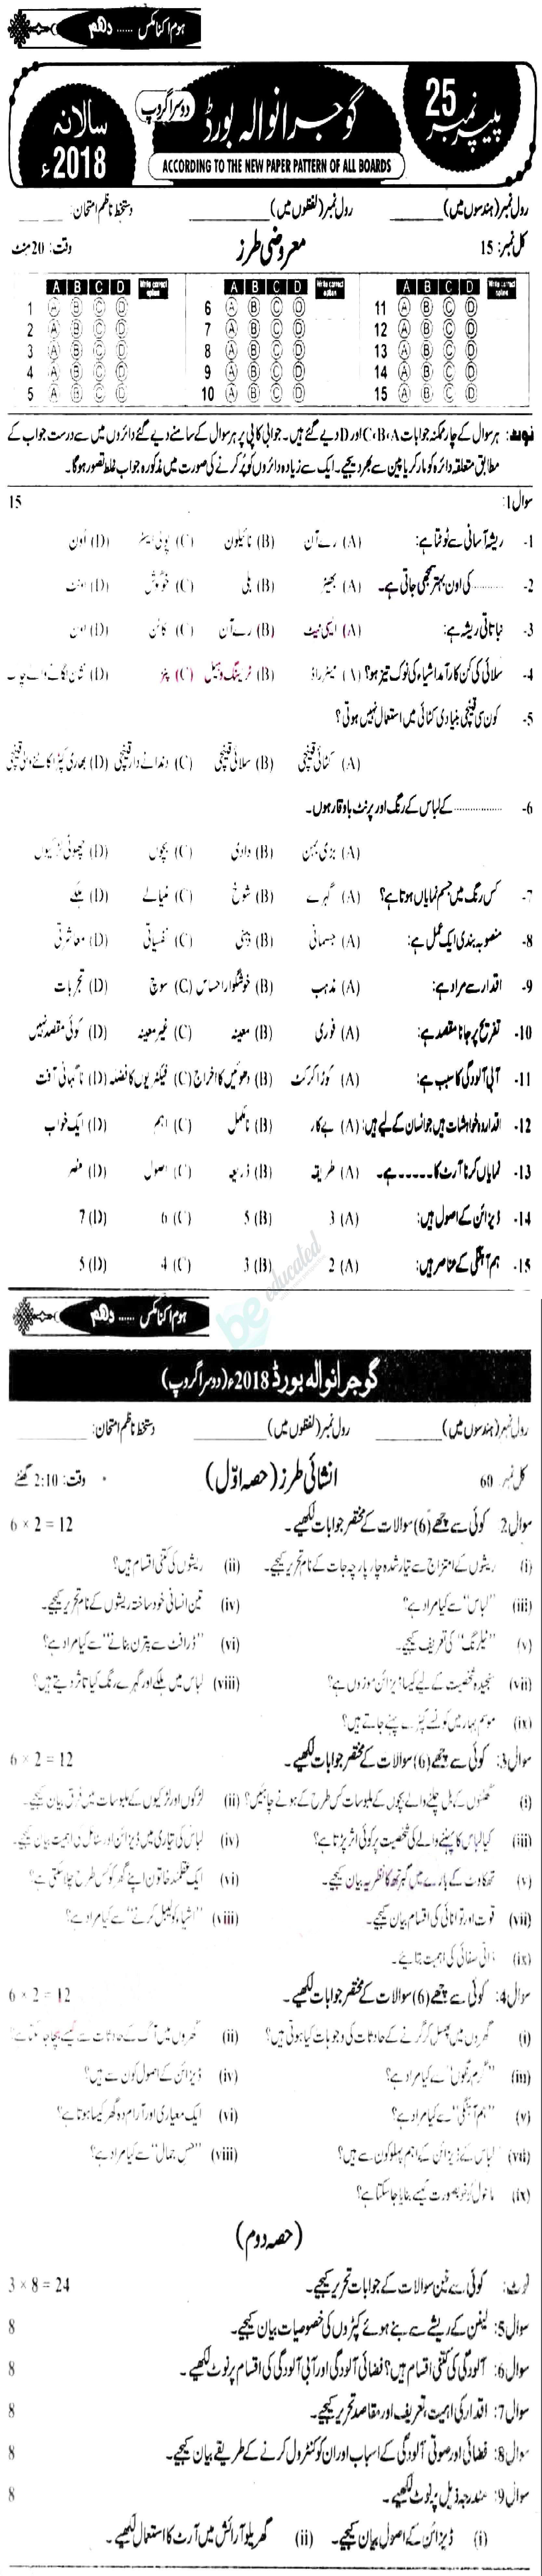 Home Economics 10th class Past Paper Group 2 BISE Gujranwala 2018